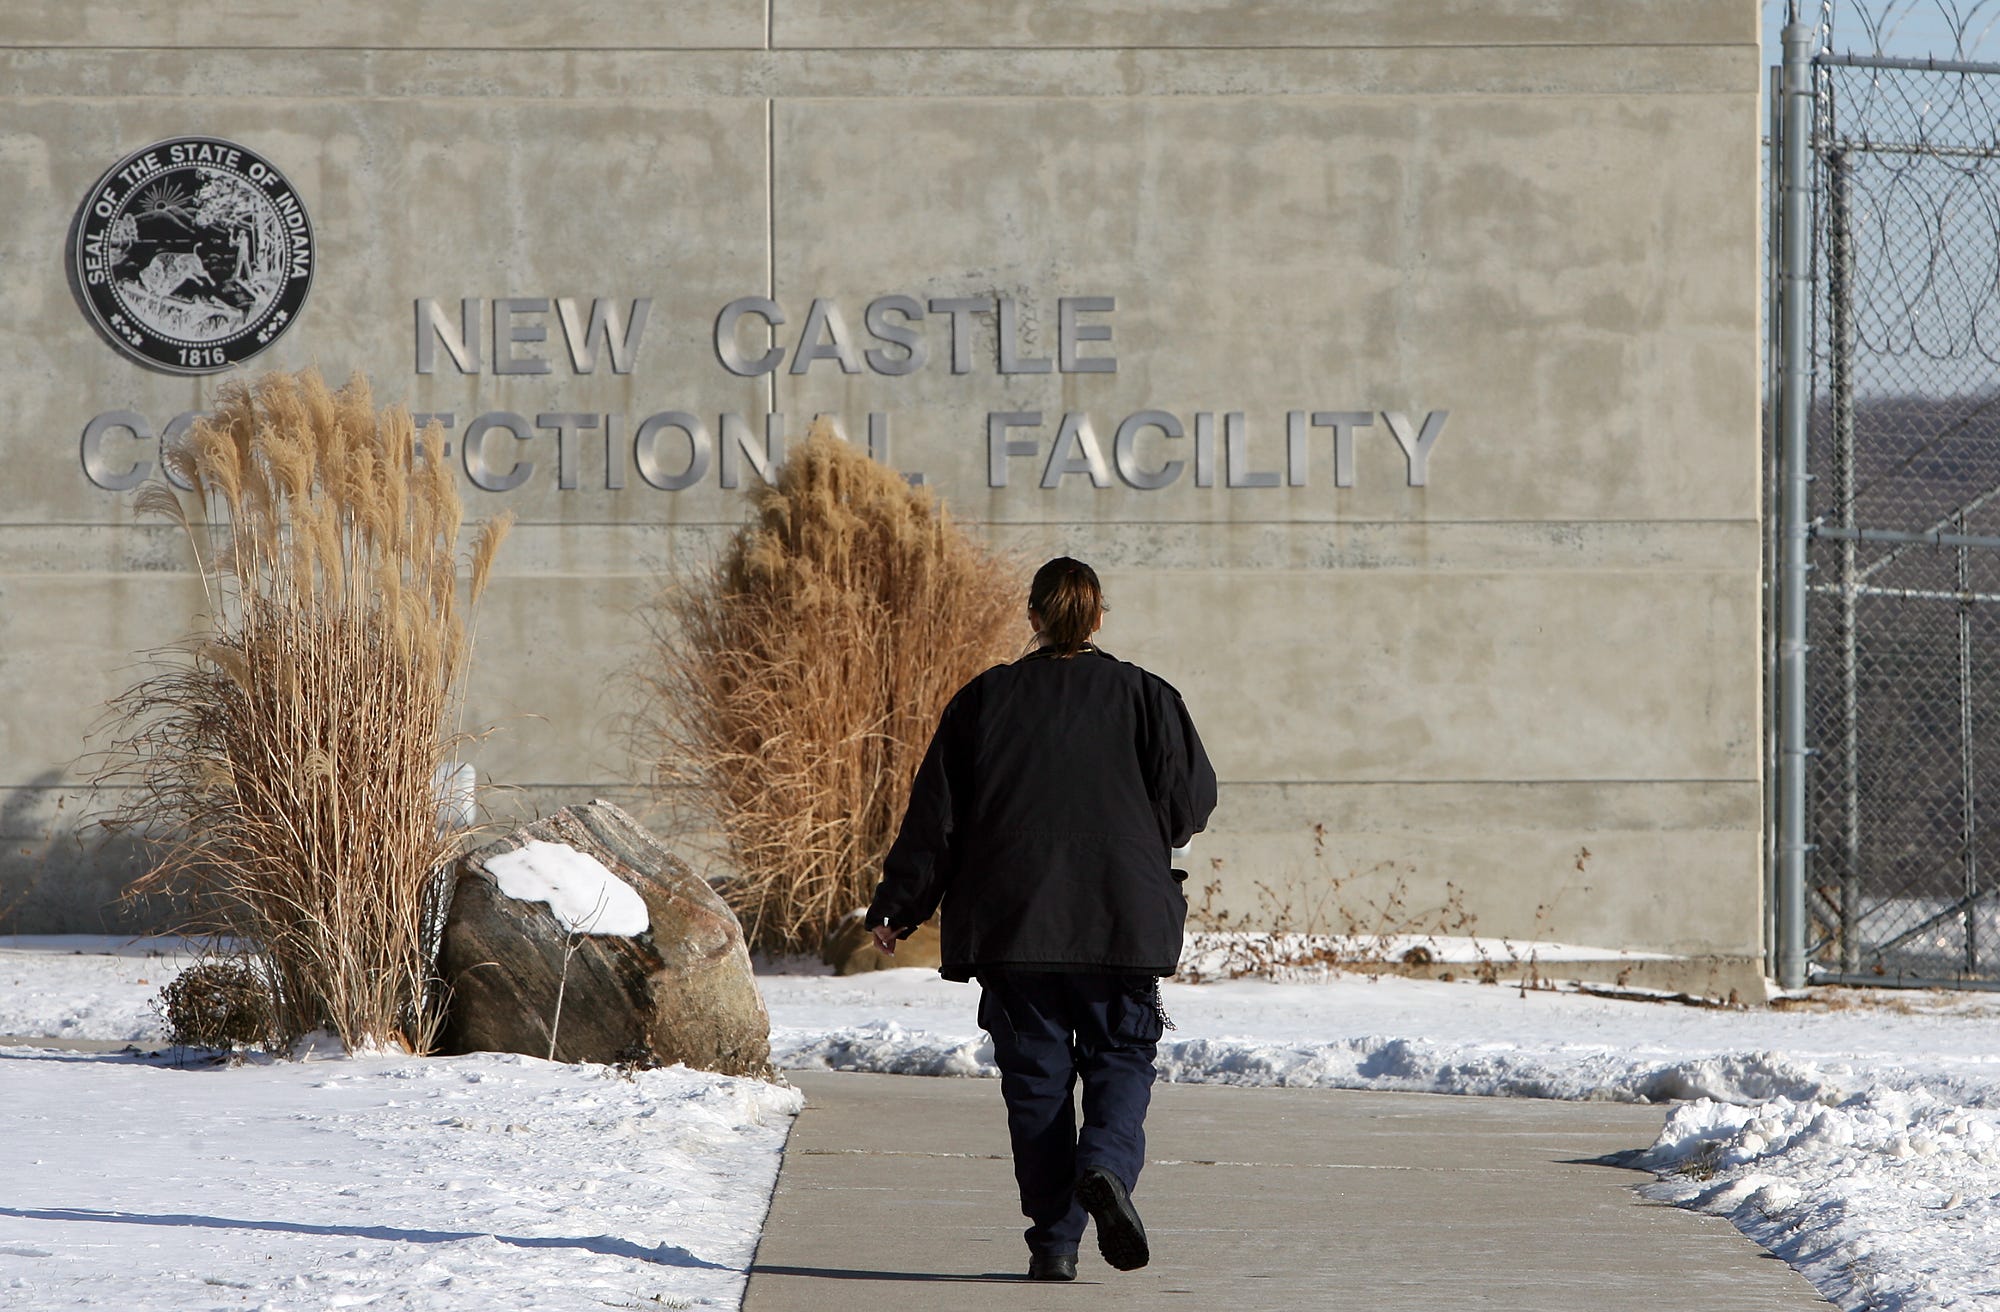 8,000 doses of a frequently abused pain drug are missing from an Indiana prison